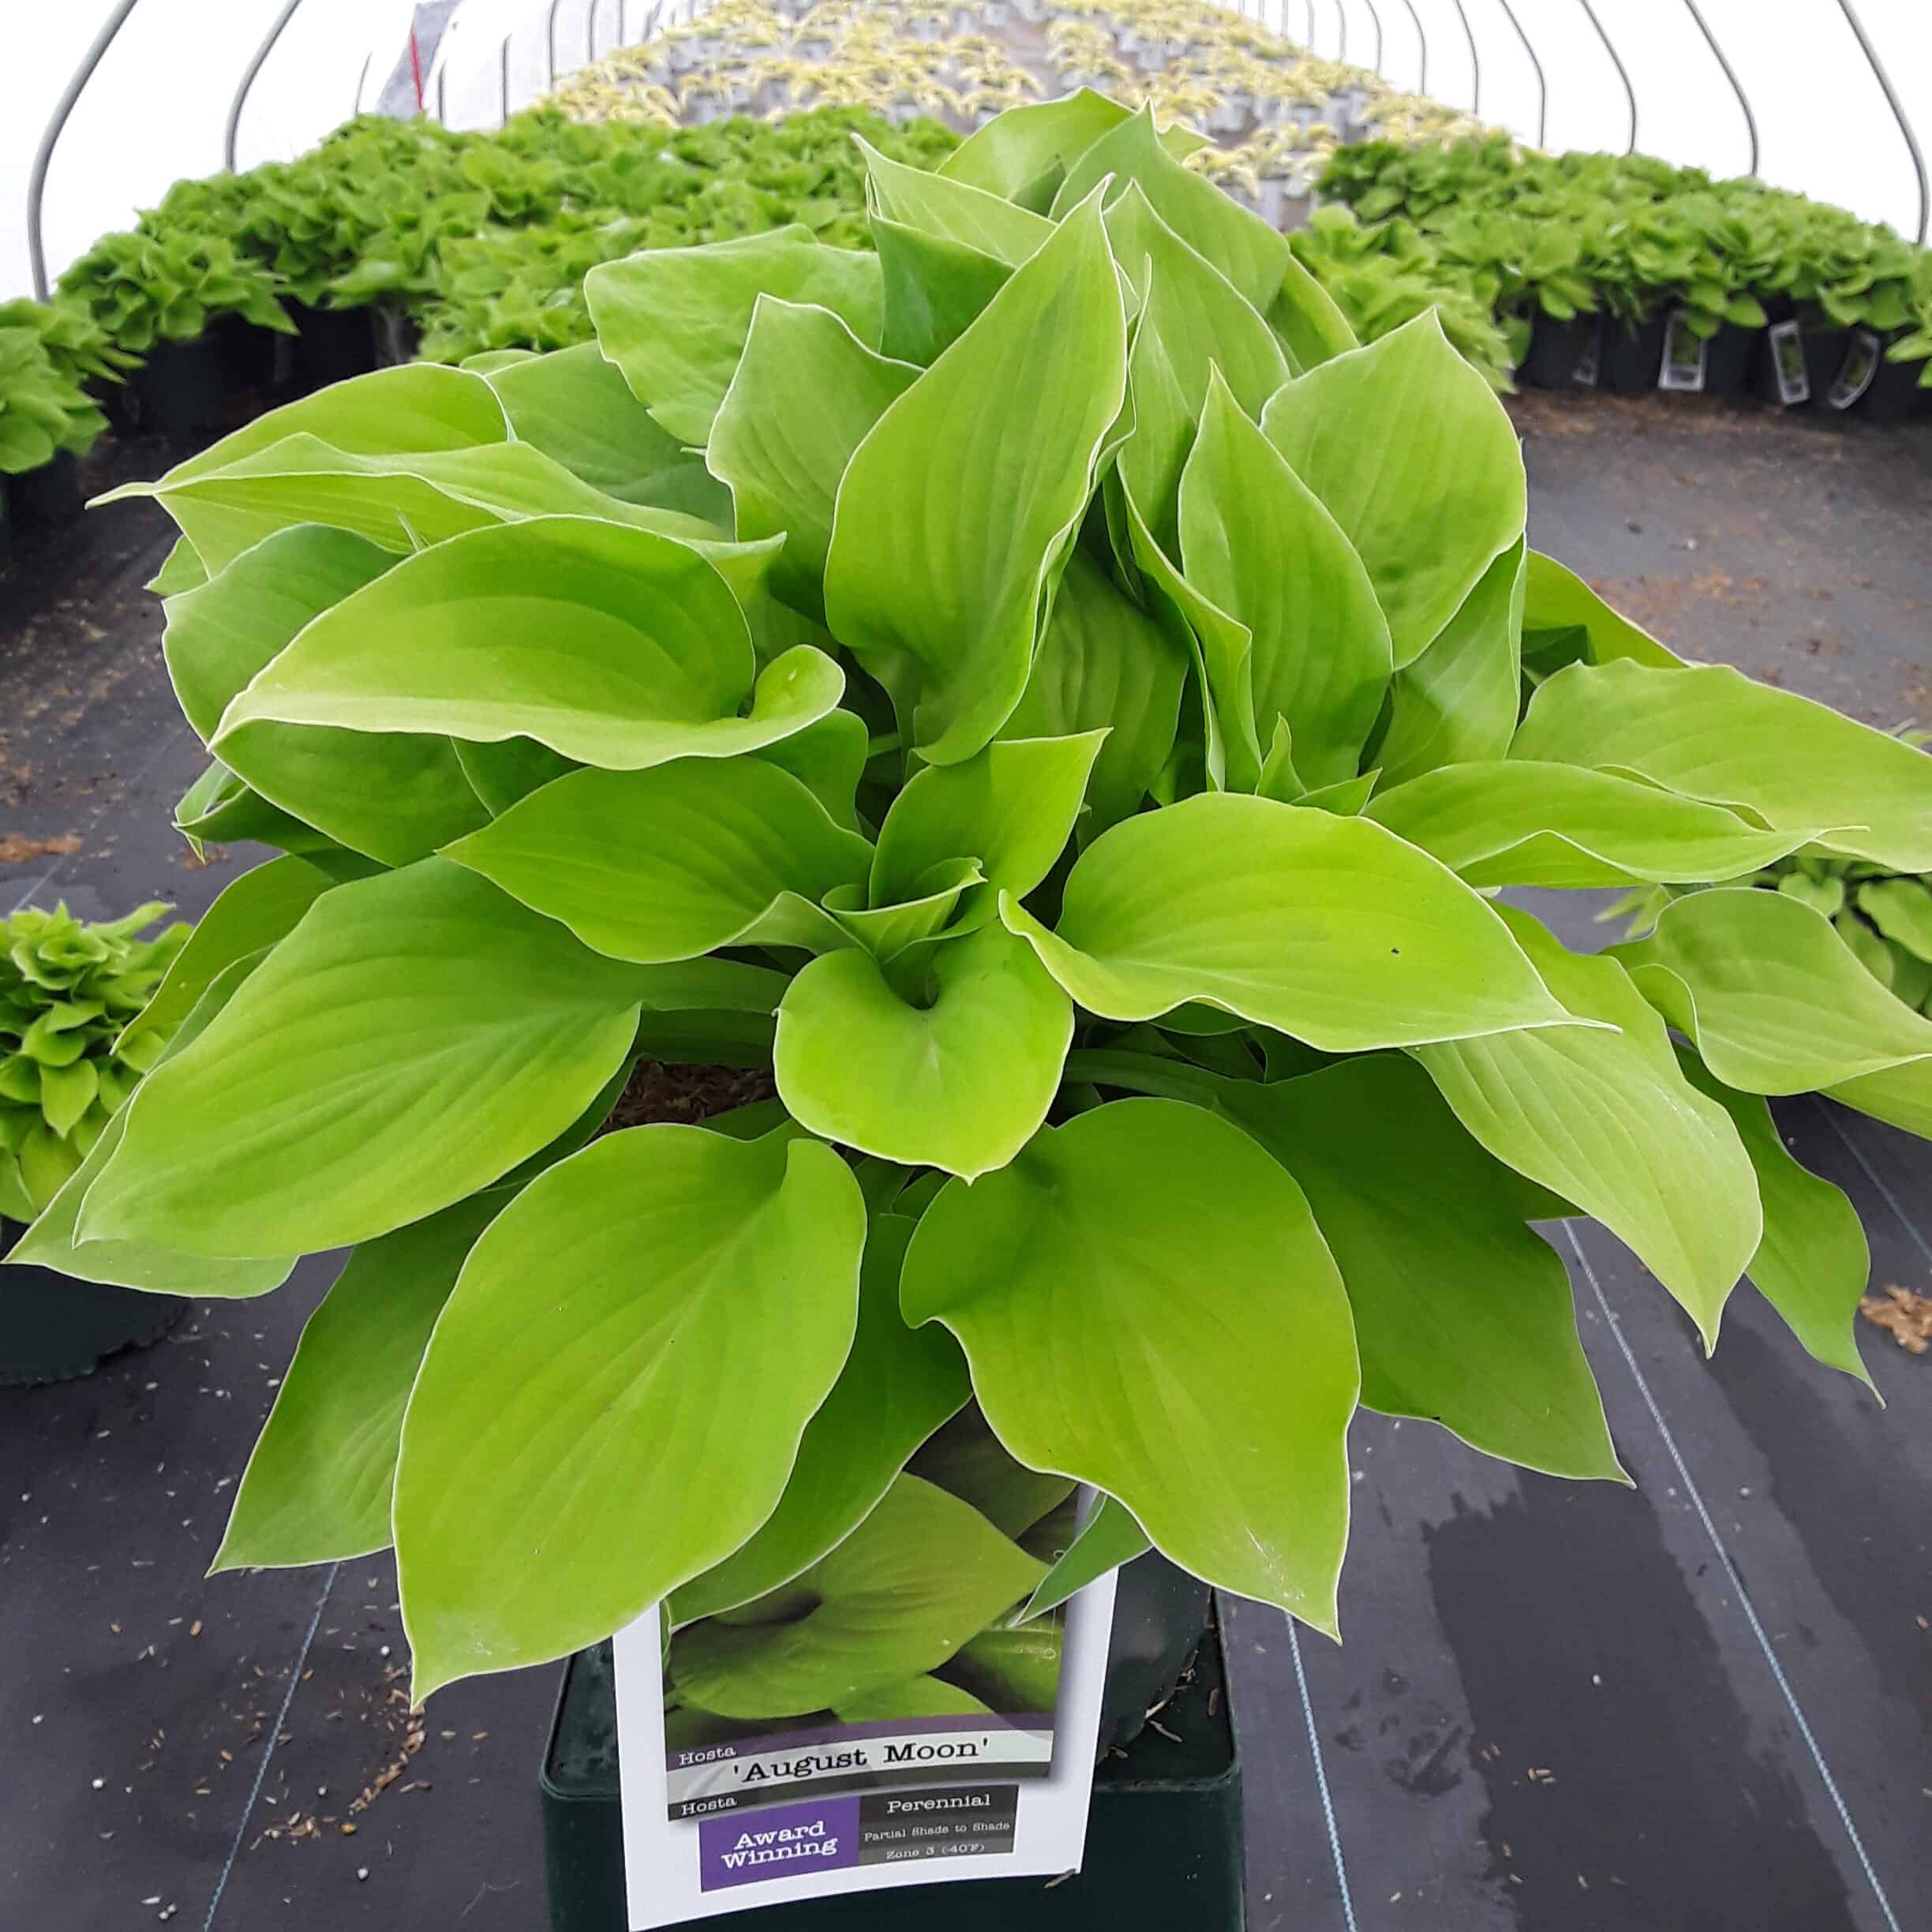 August Moon Hosta Grown By Overdevest